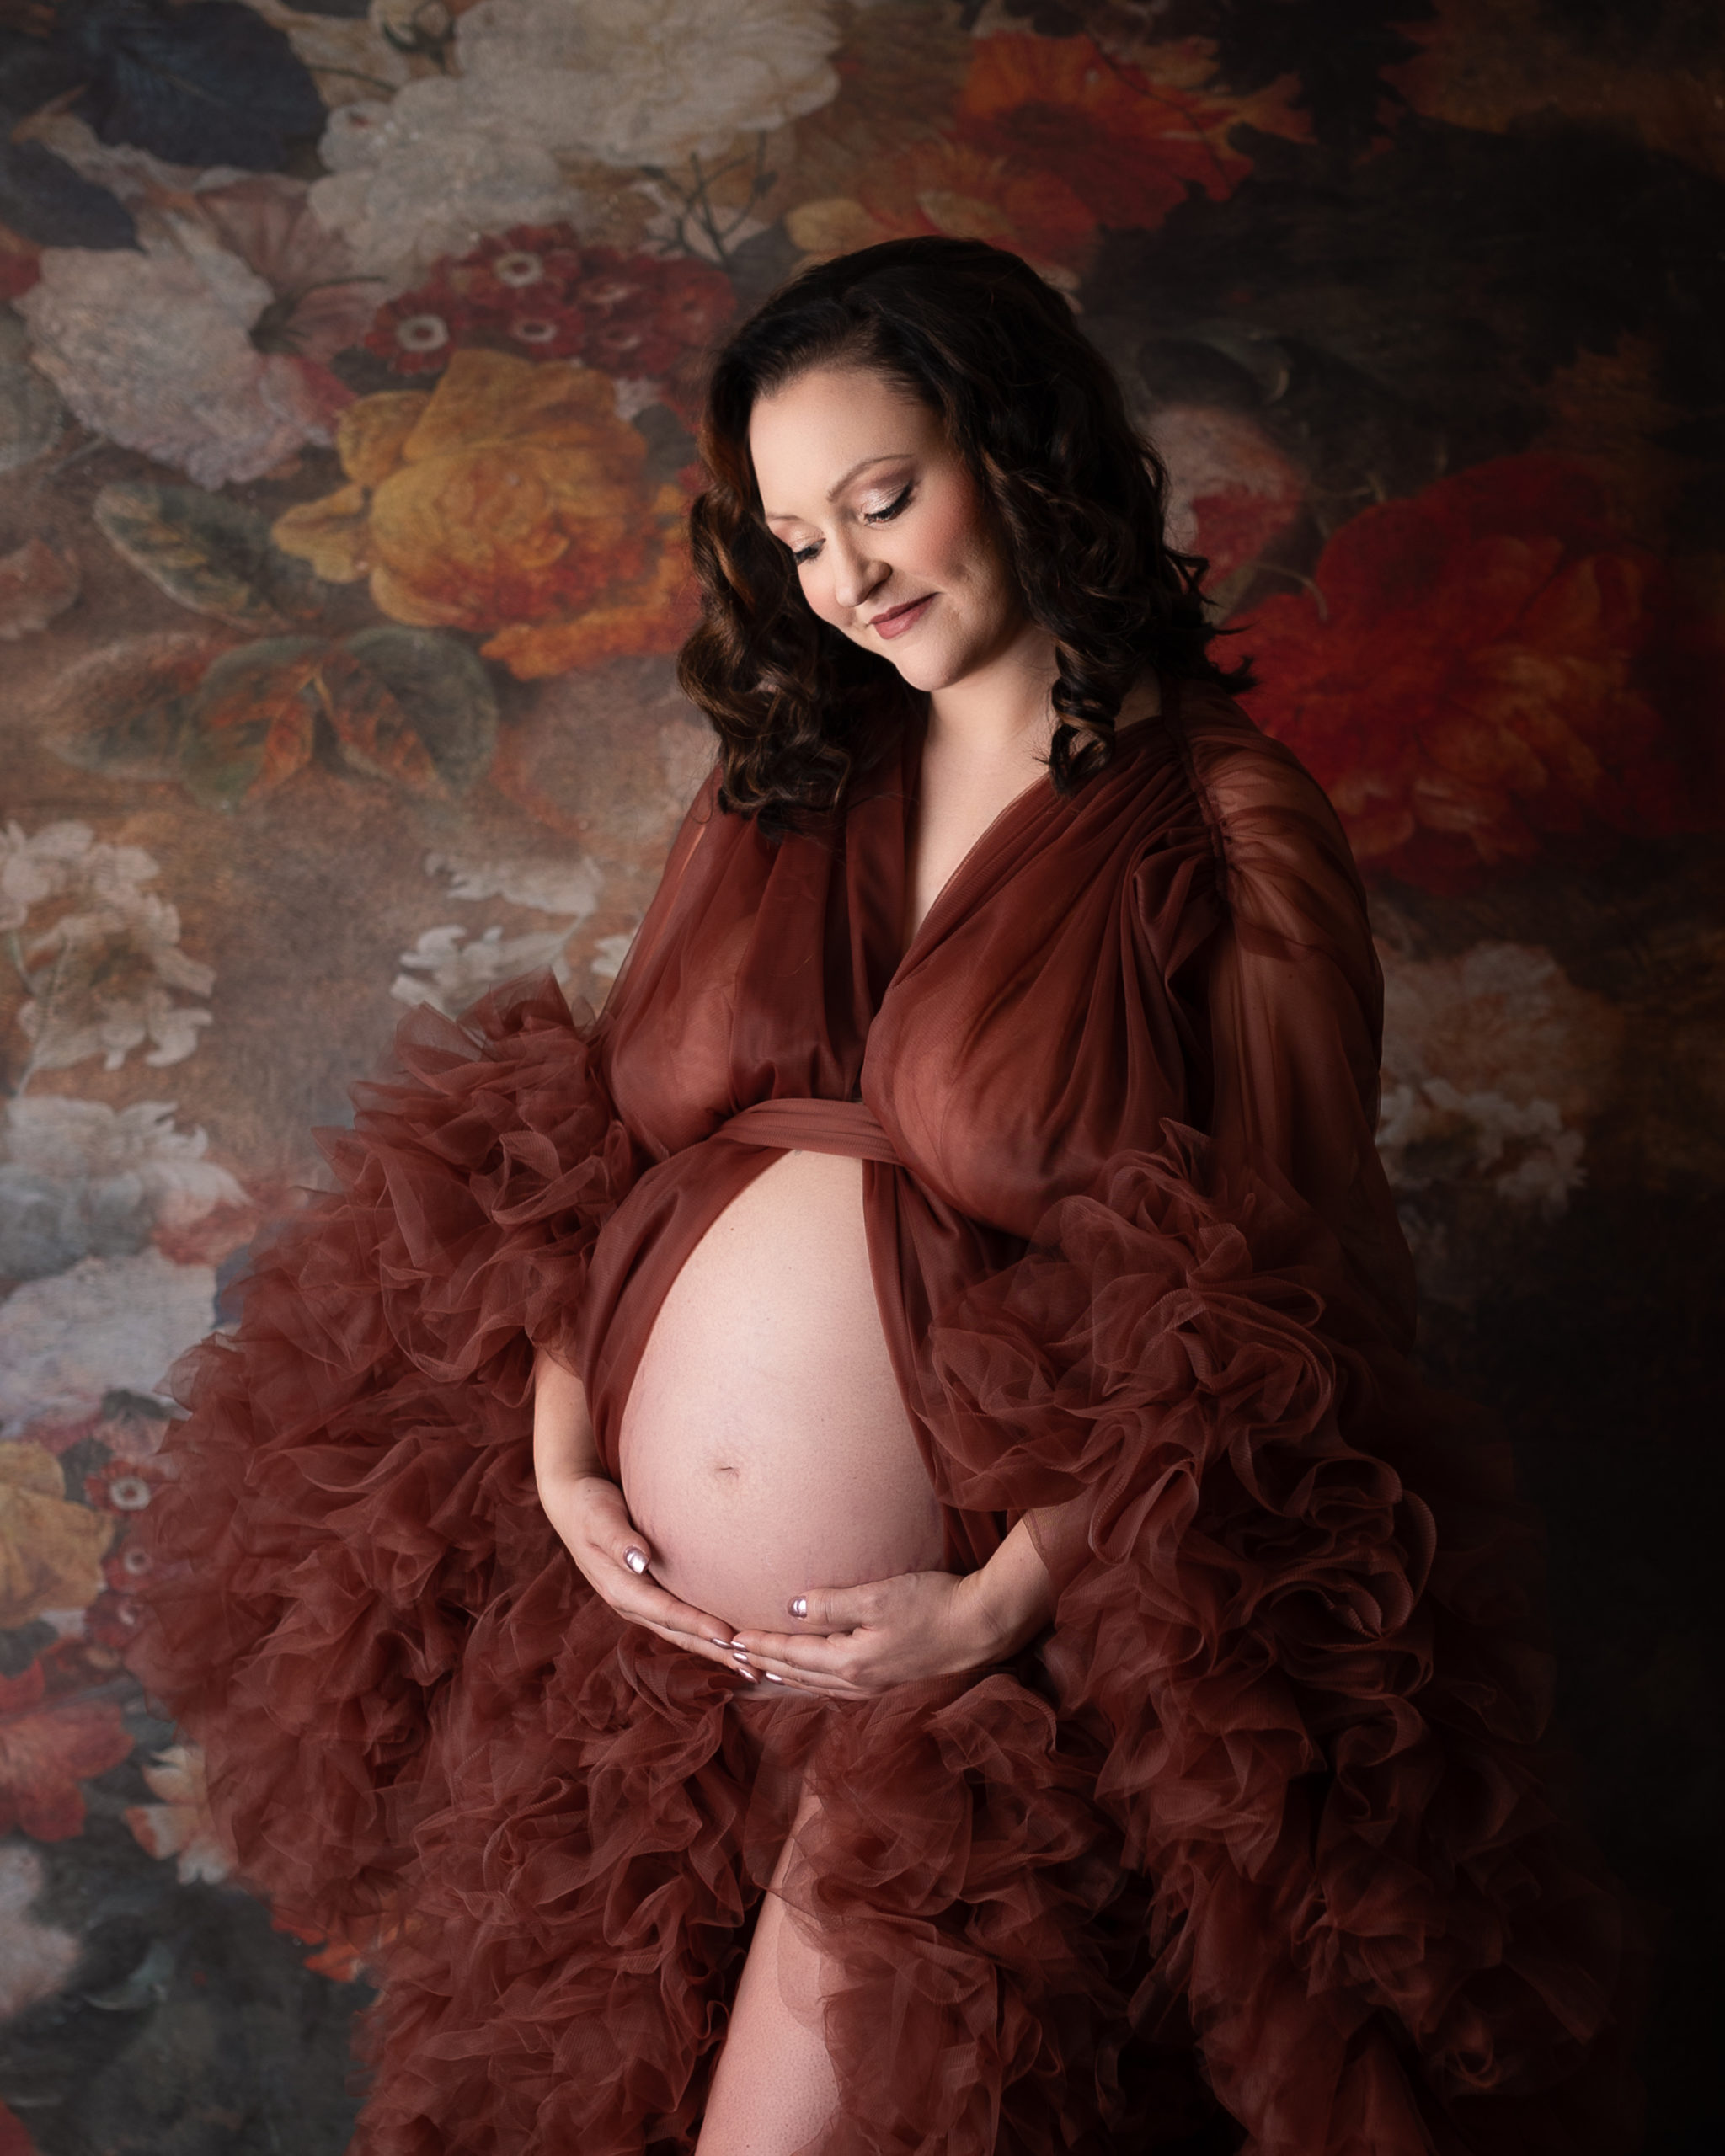 prenatal yoga studios in Akron in blog photo of pregnant woman during luxury maternity session